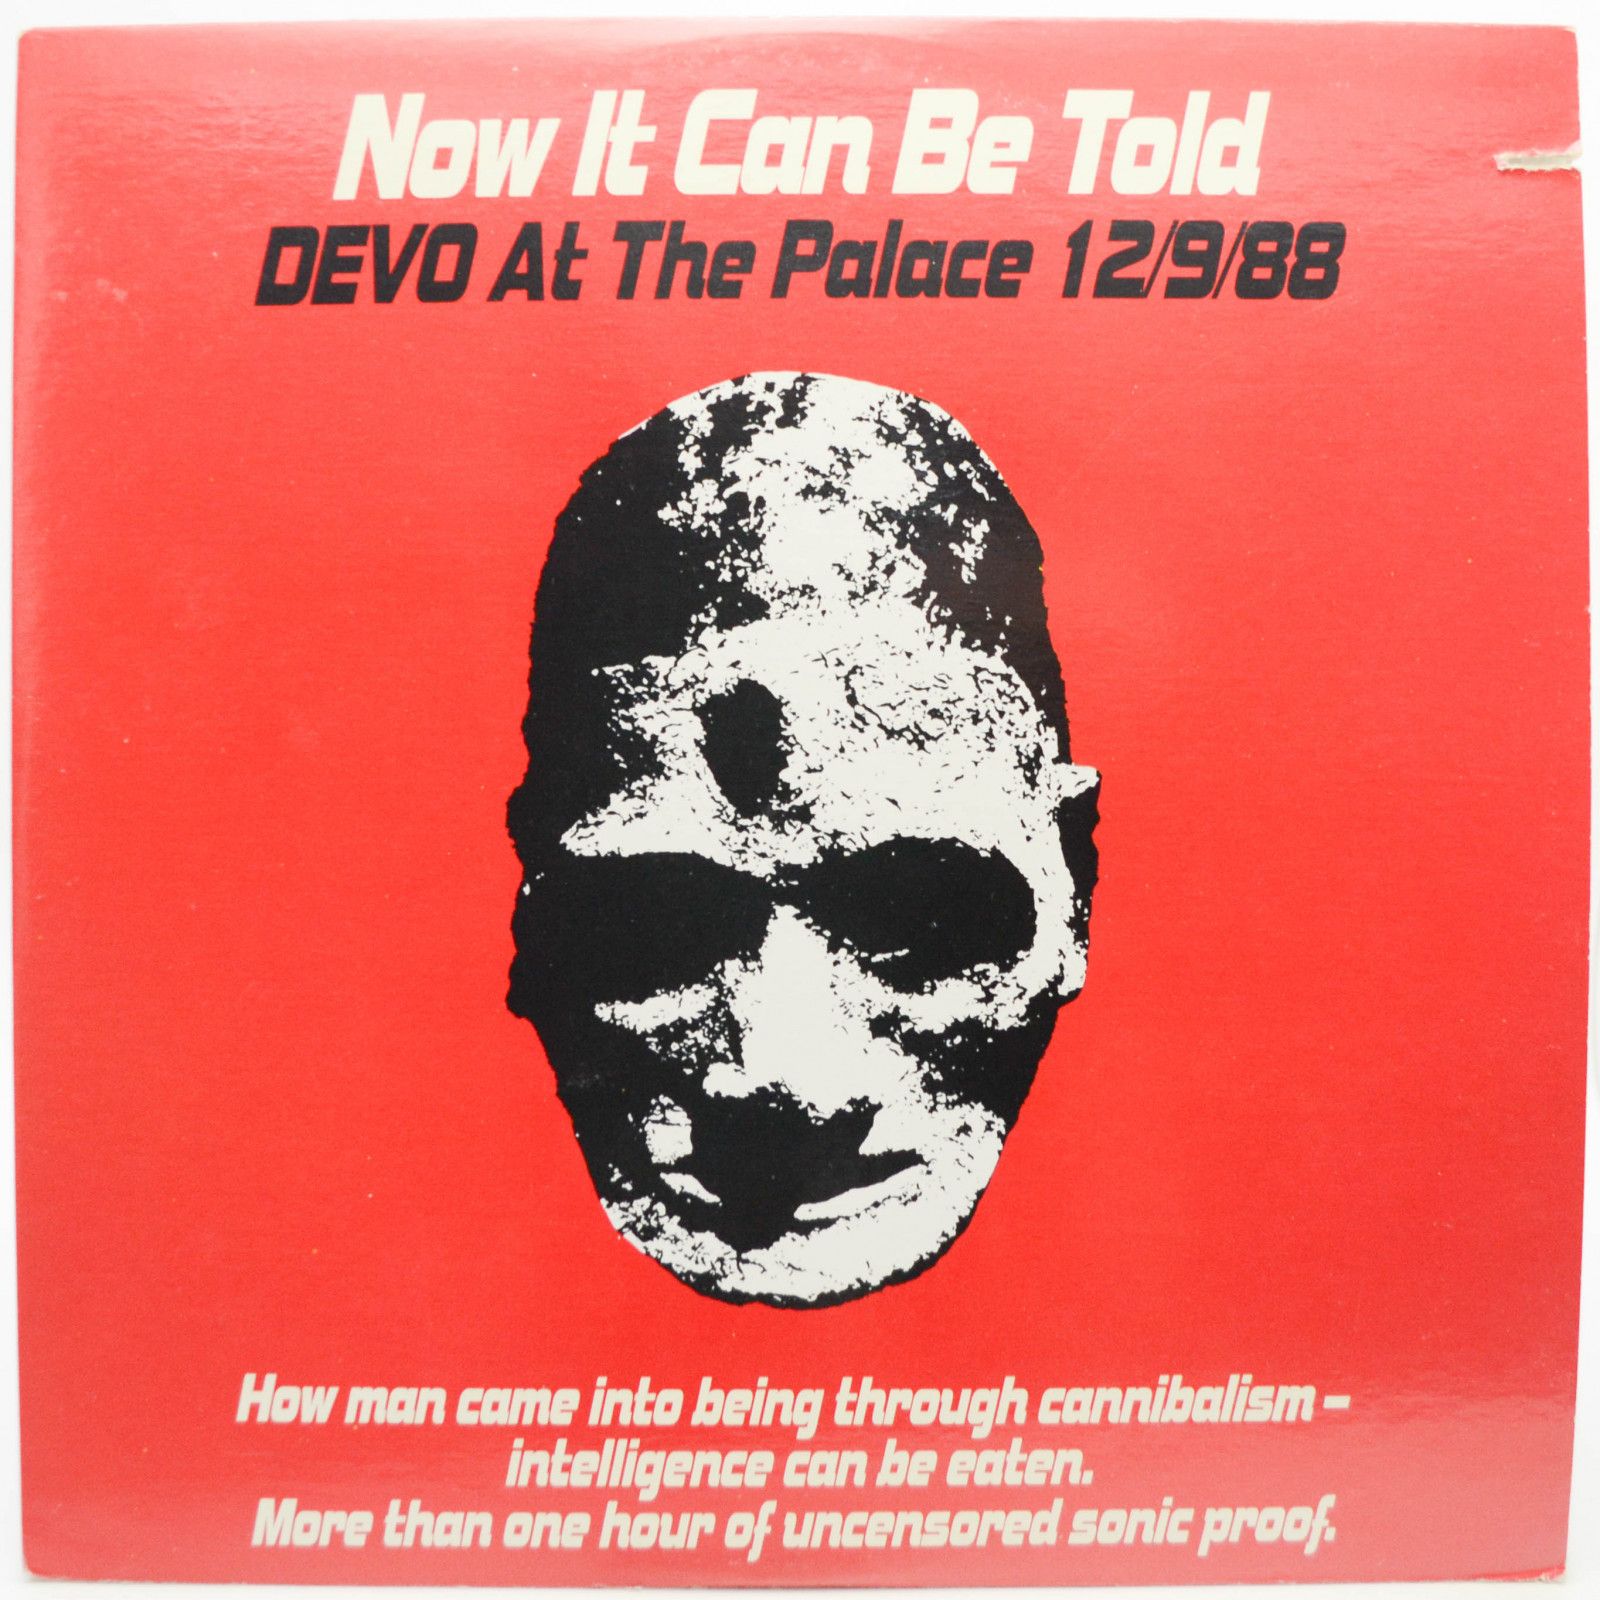 Devo — Now It Can Be Told (Devo At The Palace 12/9/88) (2LP, USA), 1989